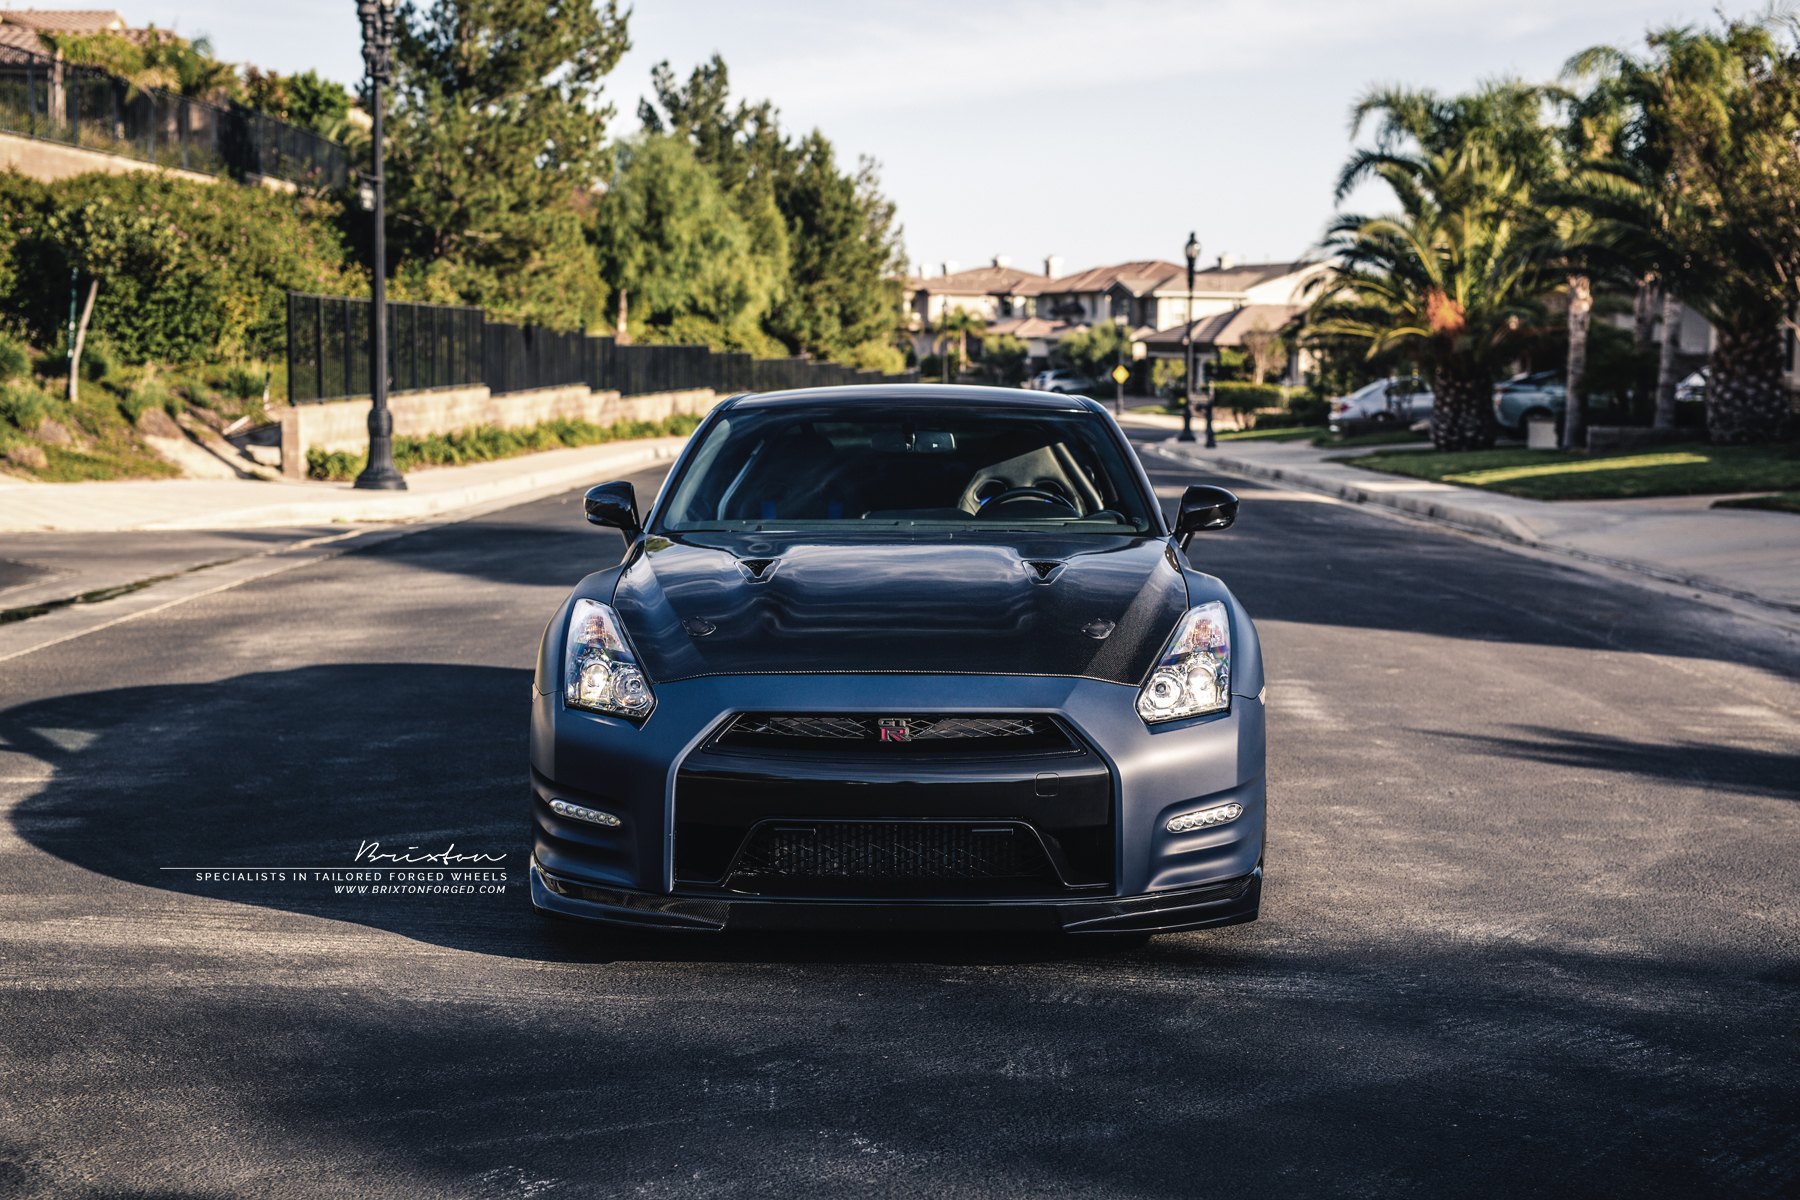 Carbon Fiber Hood on Gray Nissan GT-R - Photo by Brixton Forged Wheels